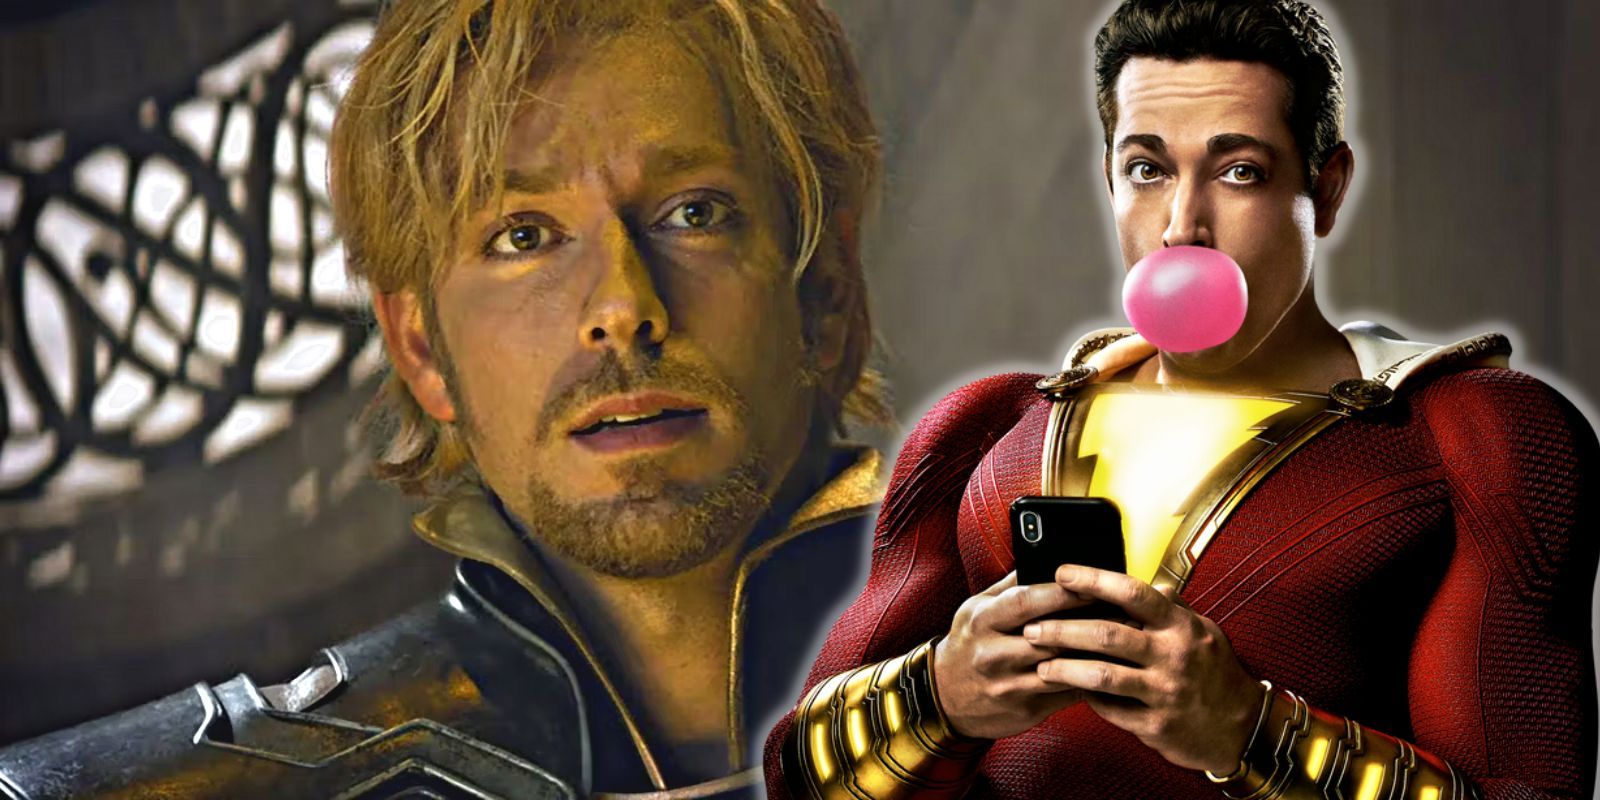 Zachary Levi looking concerned as Fandral opposite a smug Shazam